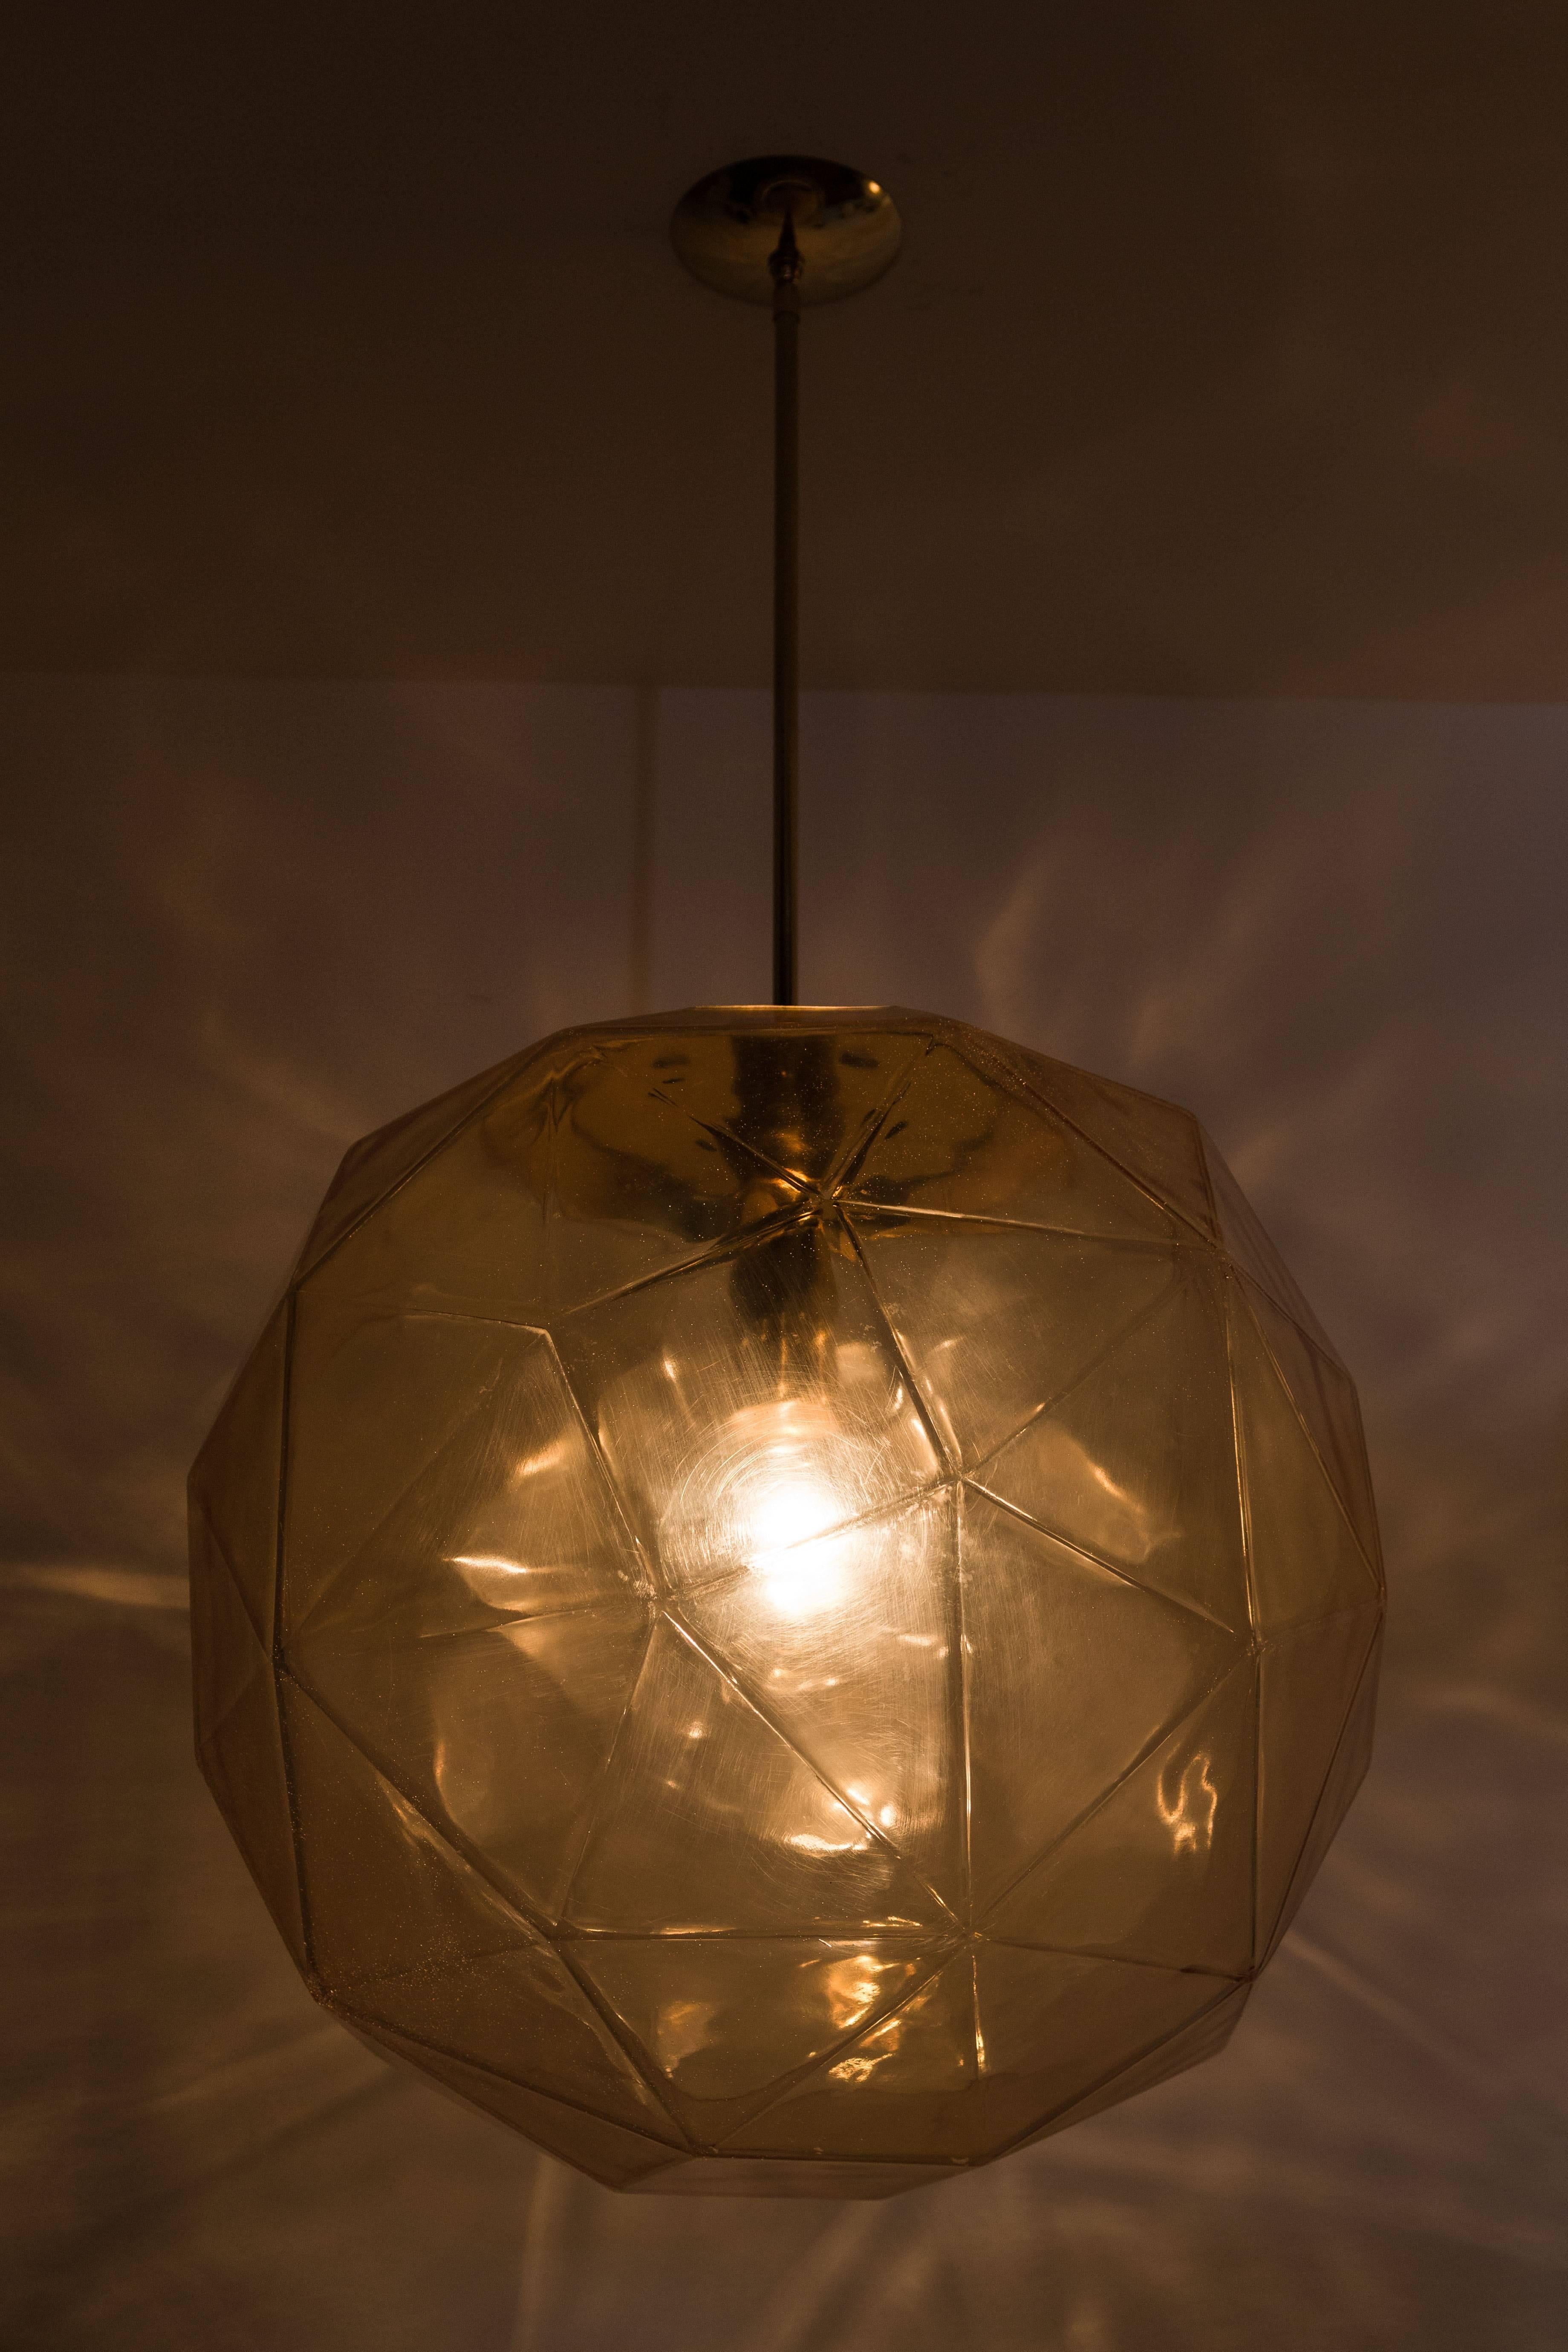 Two large geodesic acrylic globes designed by Habitat. Priced individually at $3600. Rewired. Brass canopies. Overall height can be adjusted. Each globe takes an E26 60w maximum bulb.